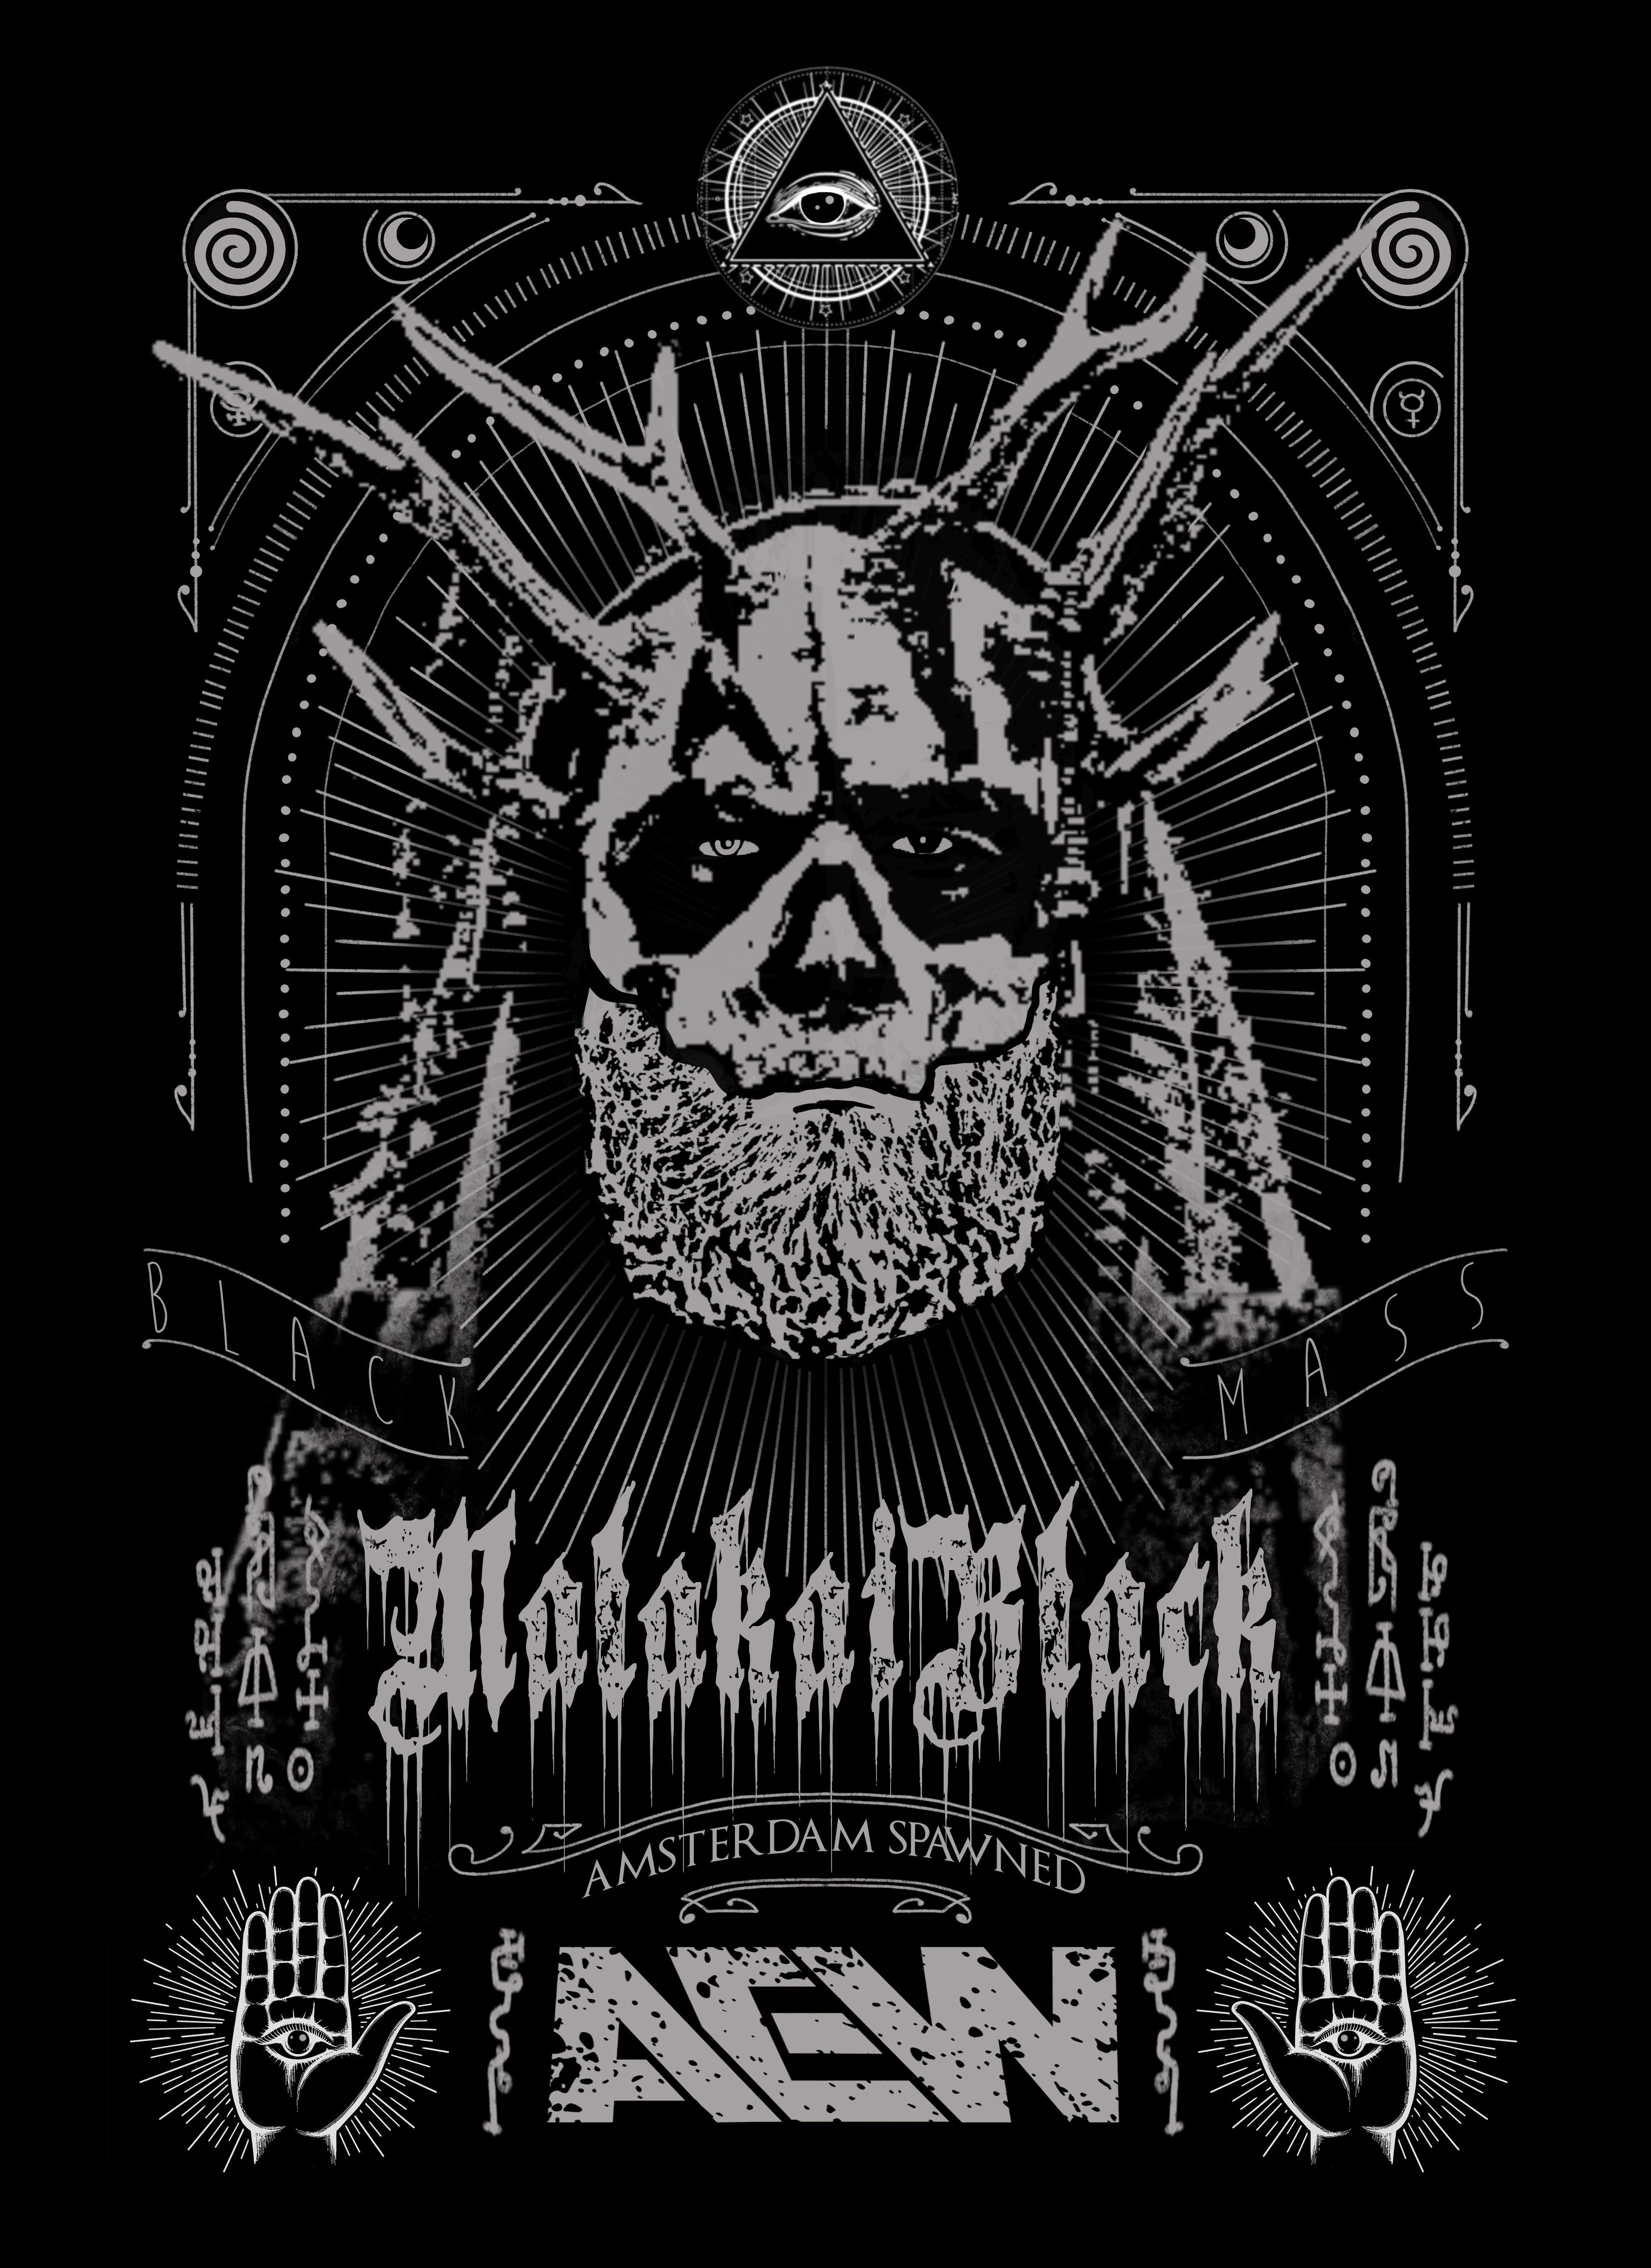 Malakai Black poster I designed the other day